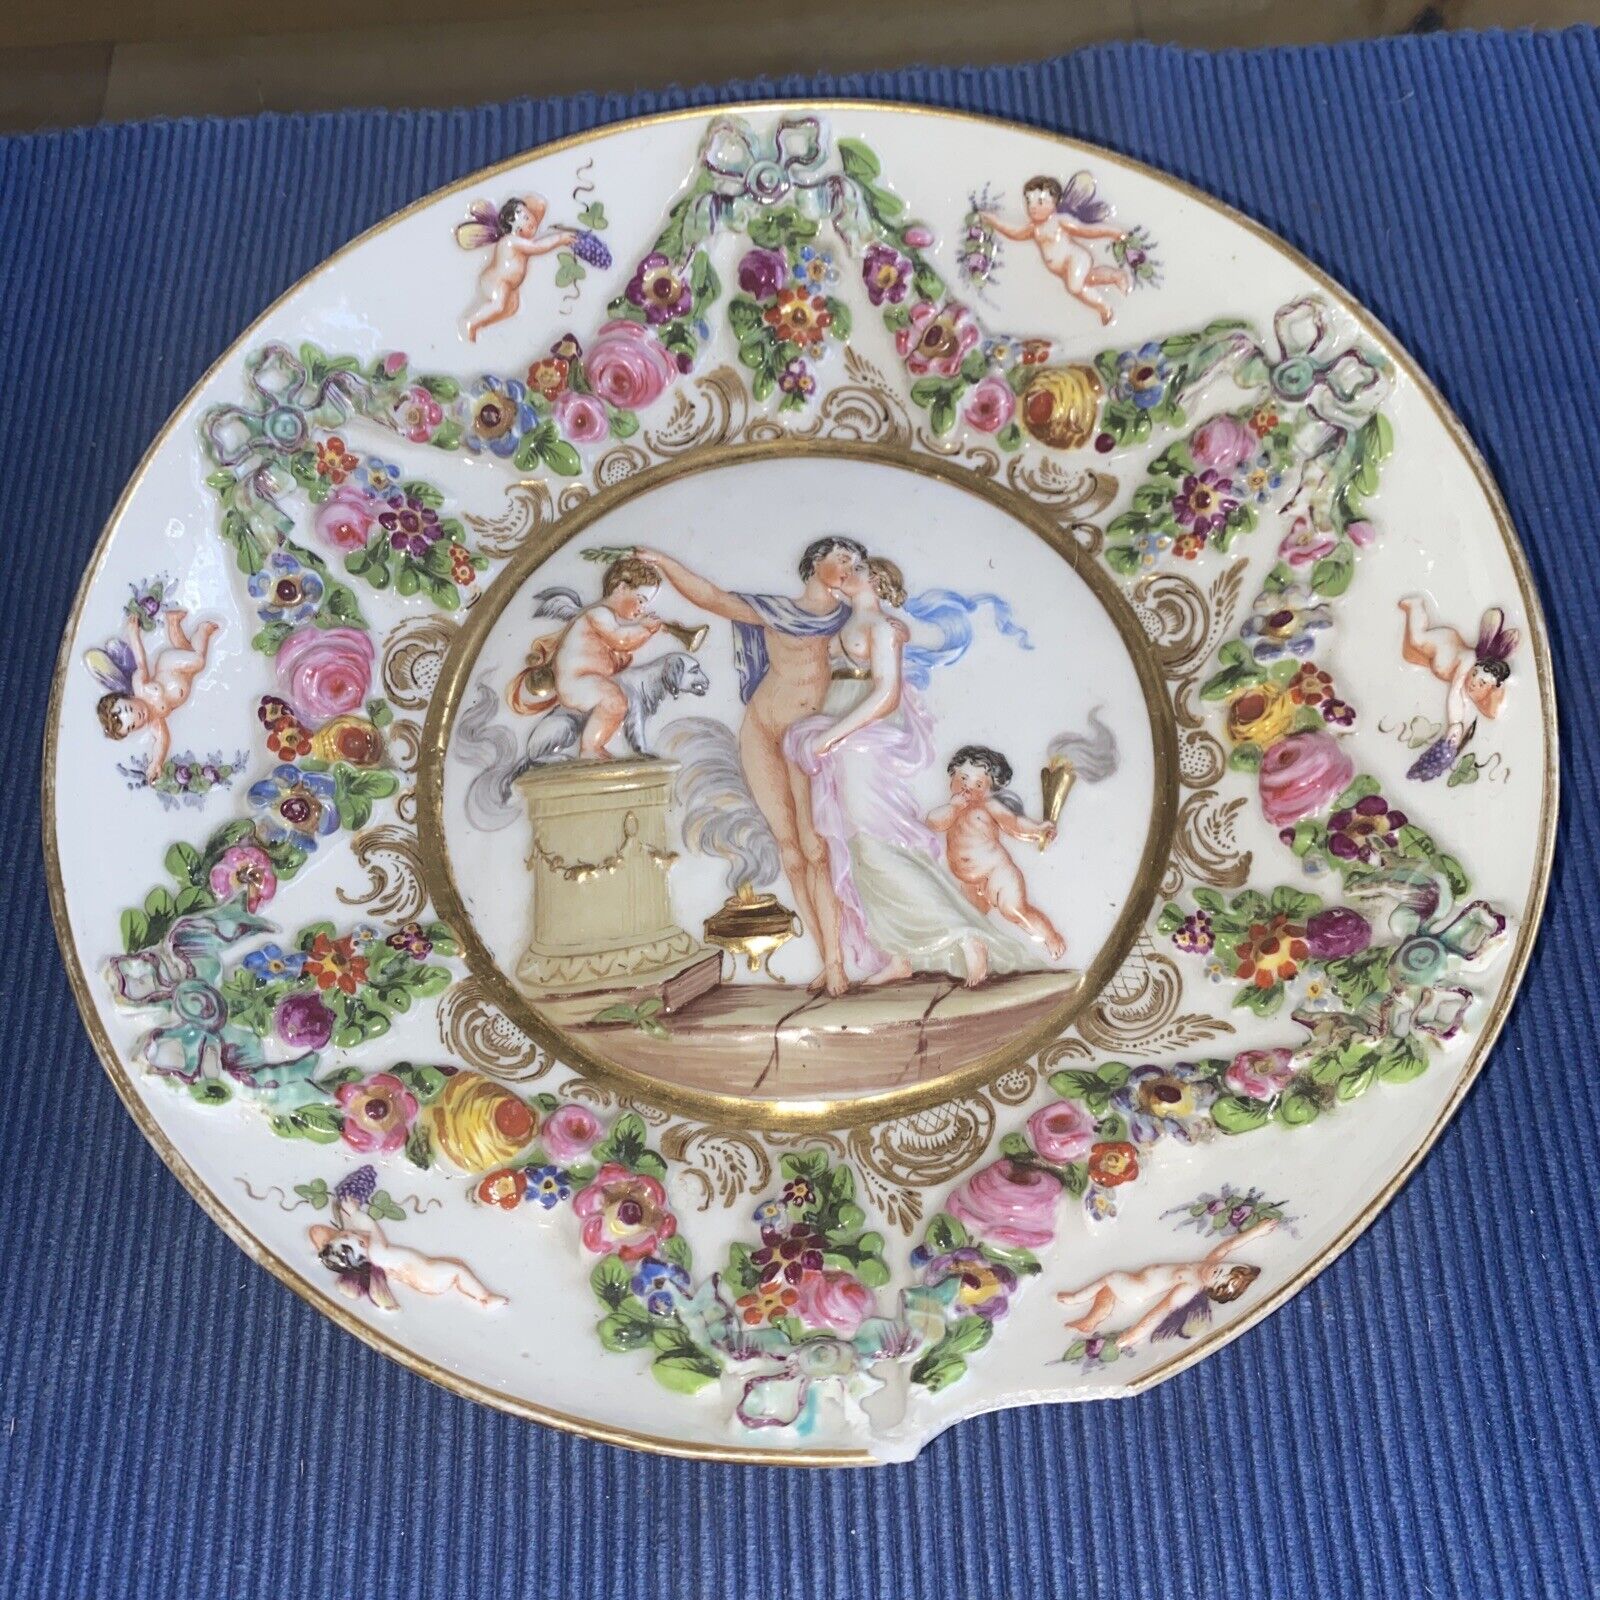 Capodimonte - Deep plate decorated with puttis and cherubs in relief